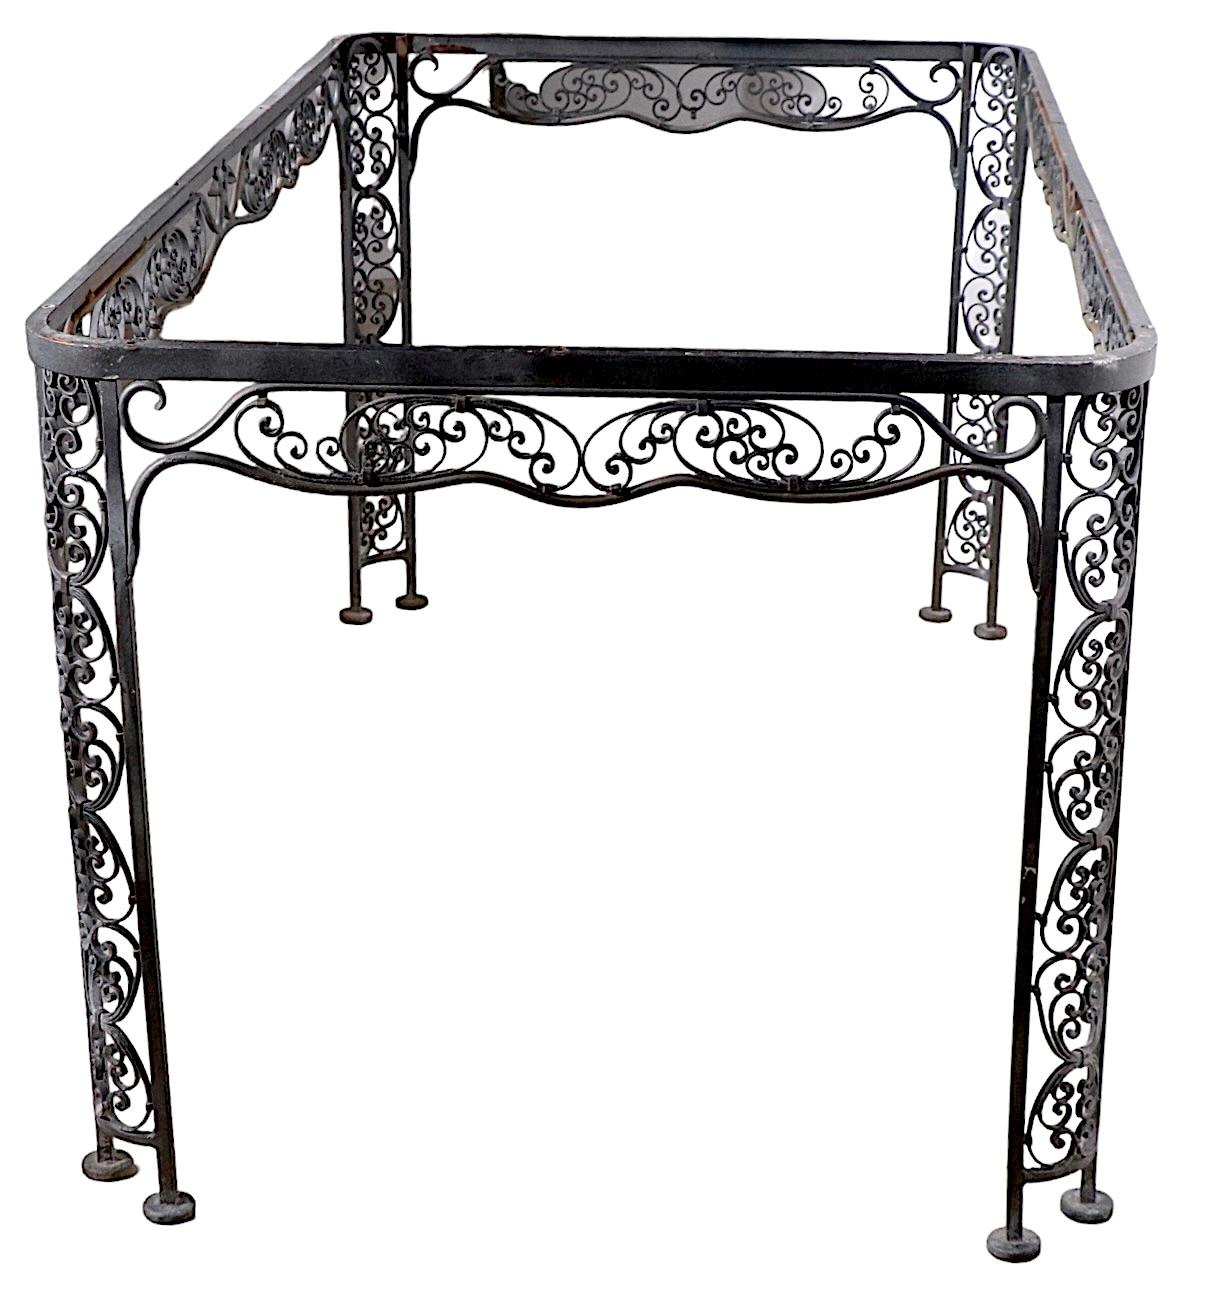 Ornate Wrought Iron Garden Patio Poolside Dining Table by Lee Woodard, c 1940's In Good Condition For Sale In New York, NY